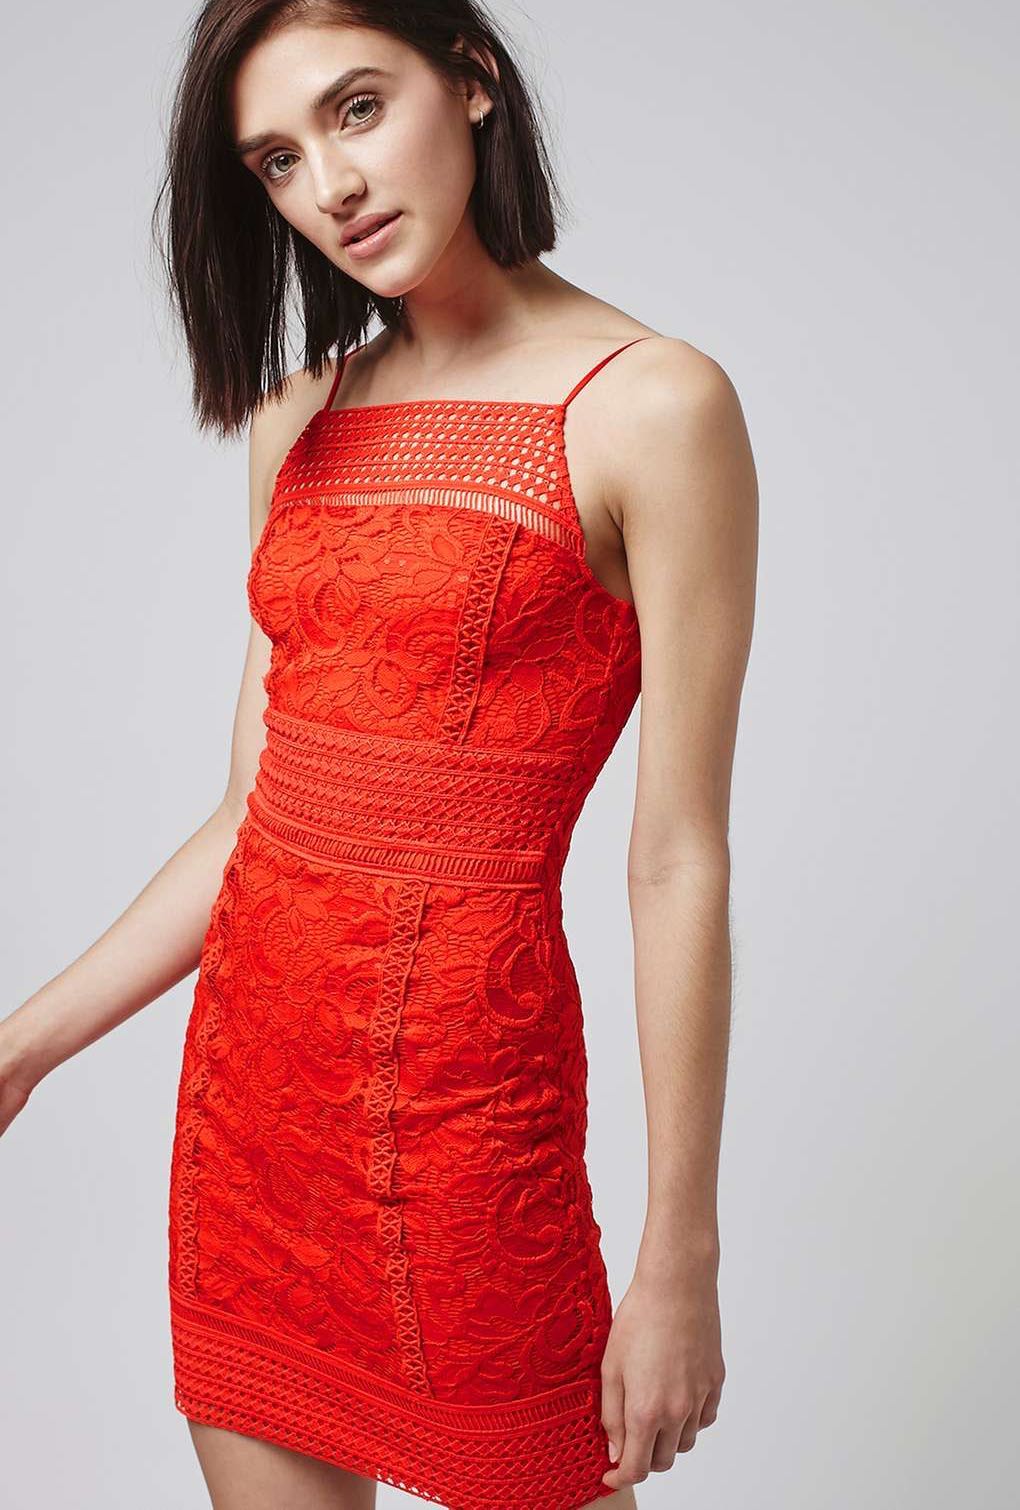 topshop red lace dress